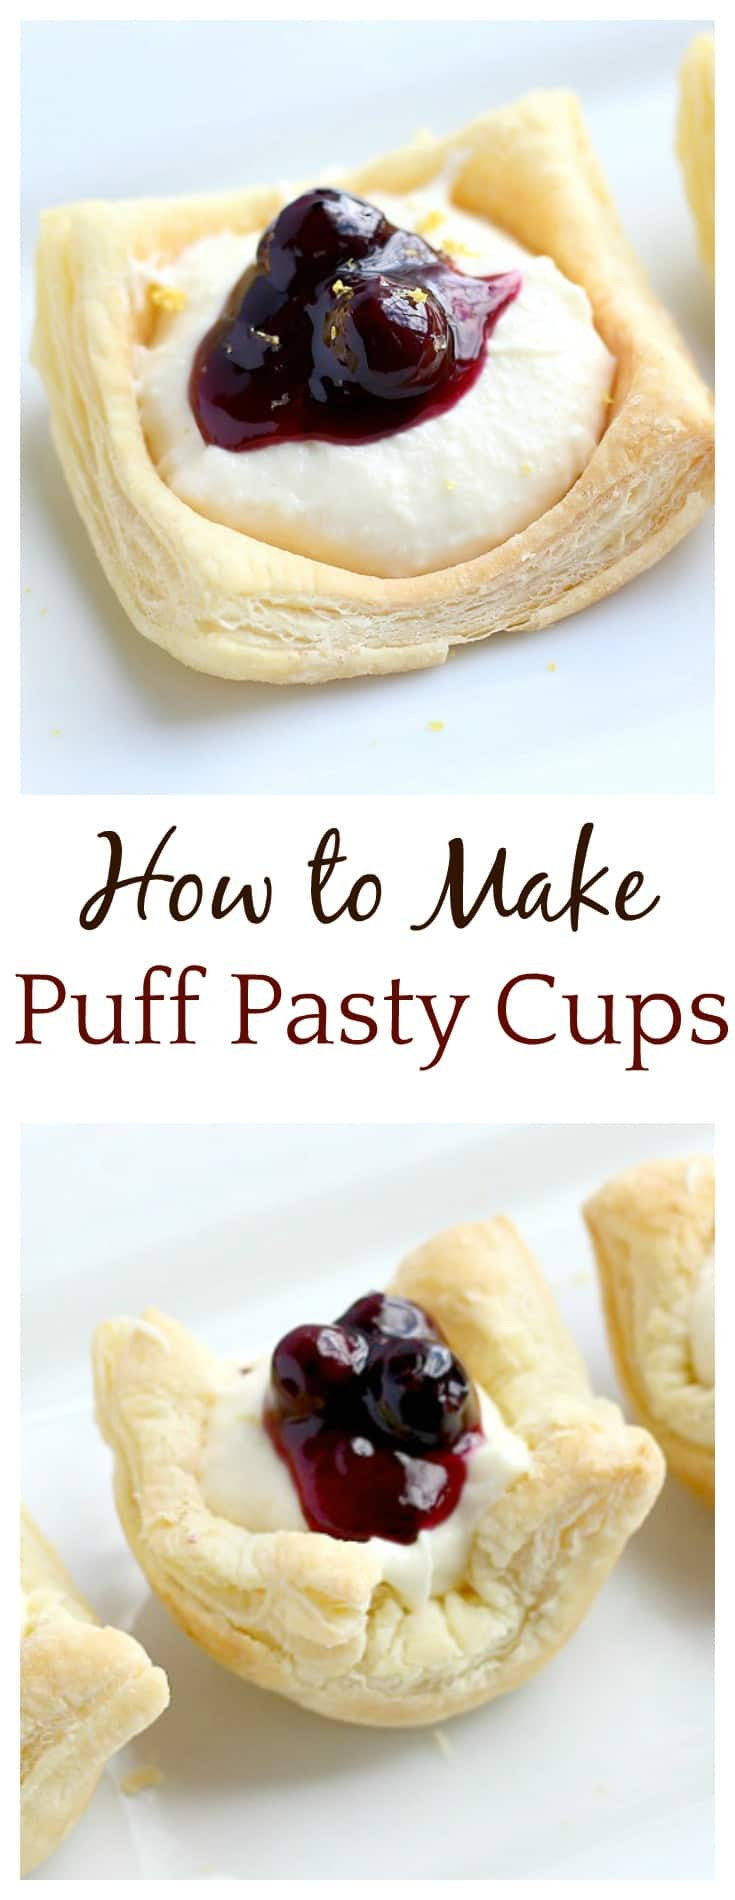 Puff Pastry Cups Appetizers
 How to Make Puff Pastry Cups 2 Ways Delicious Little Bites